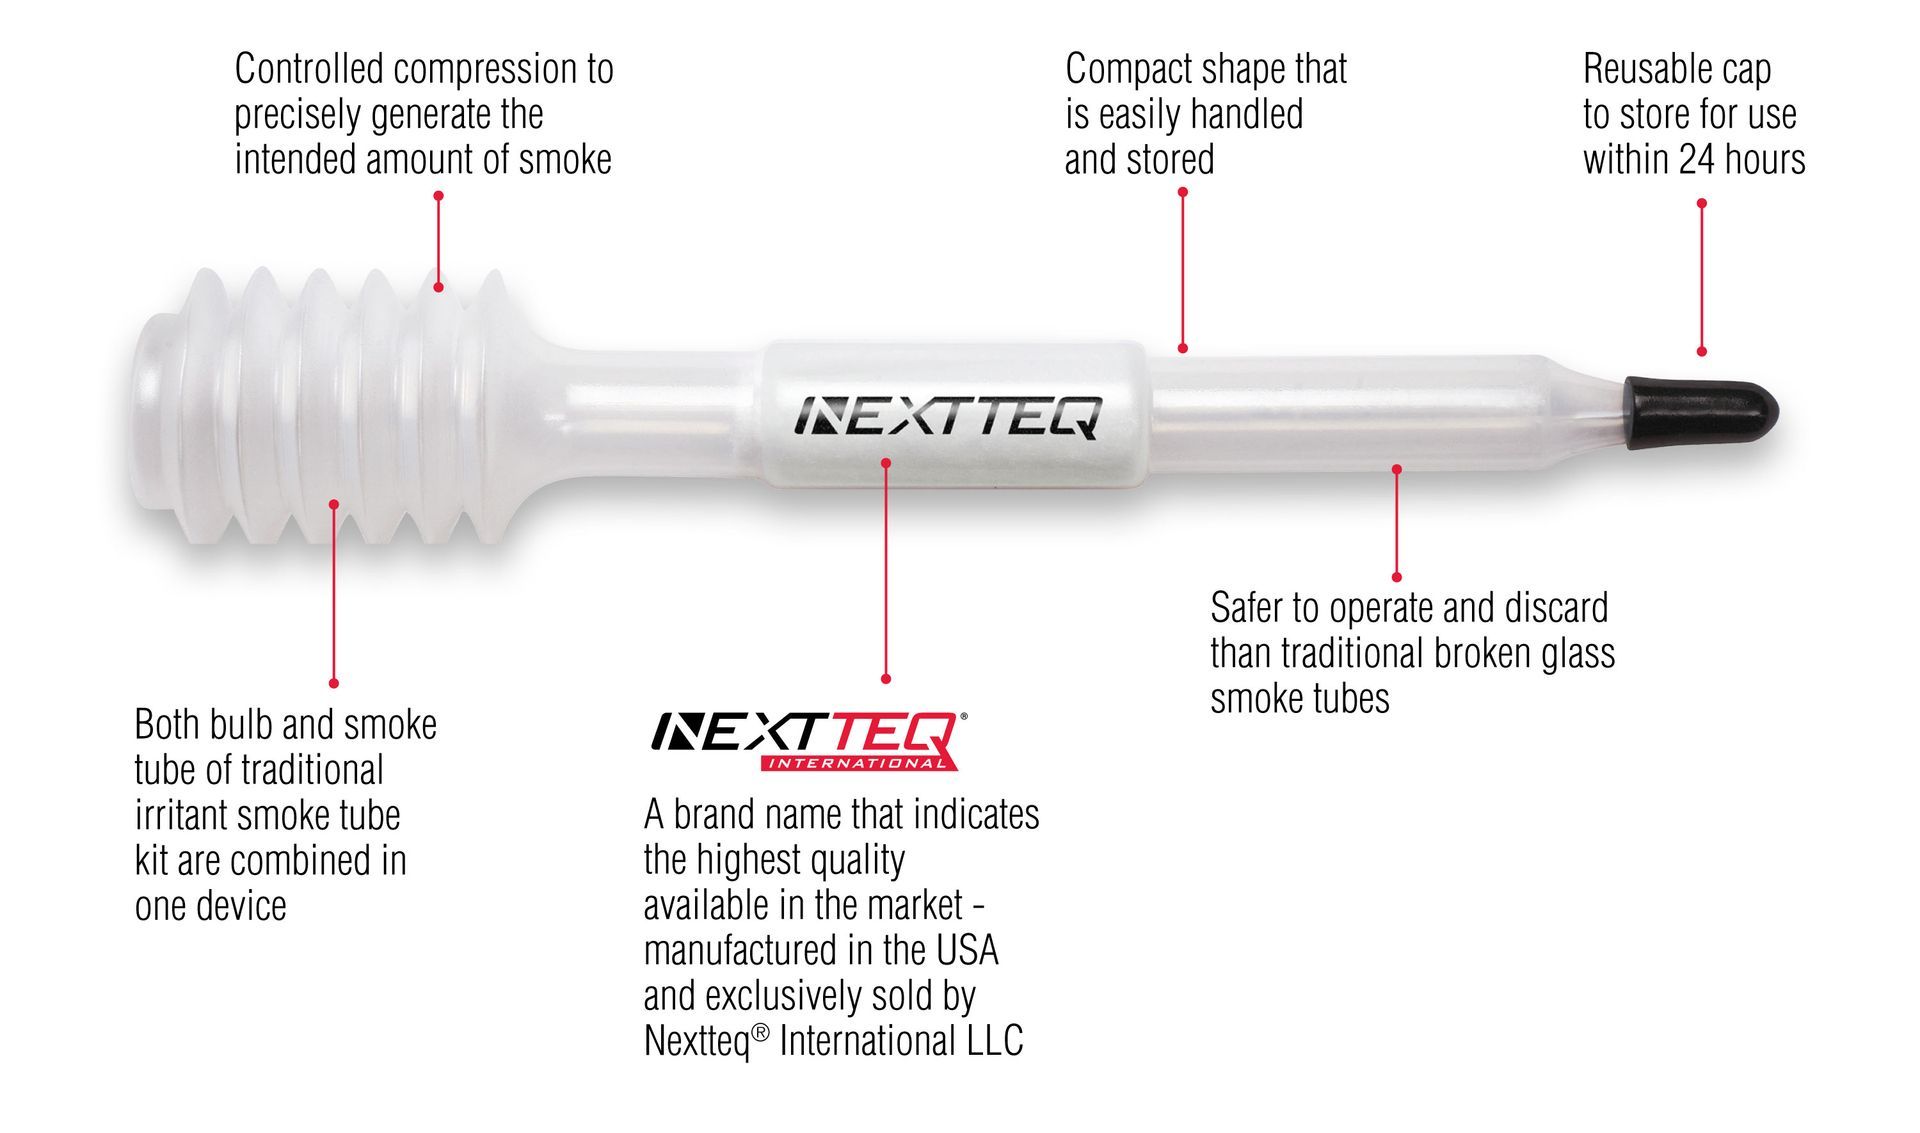 A Nextteq® VeriFit® Irritant Smoke Generator with feature call-outs.